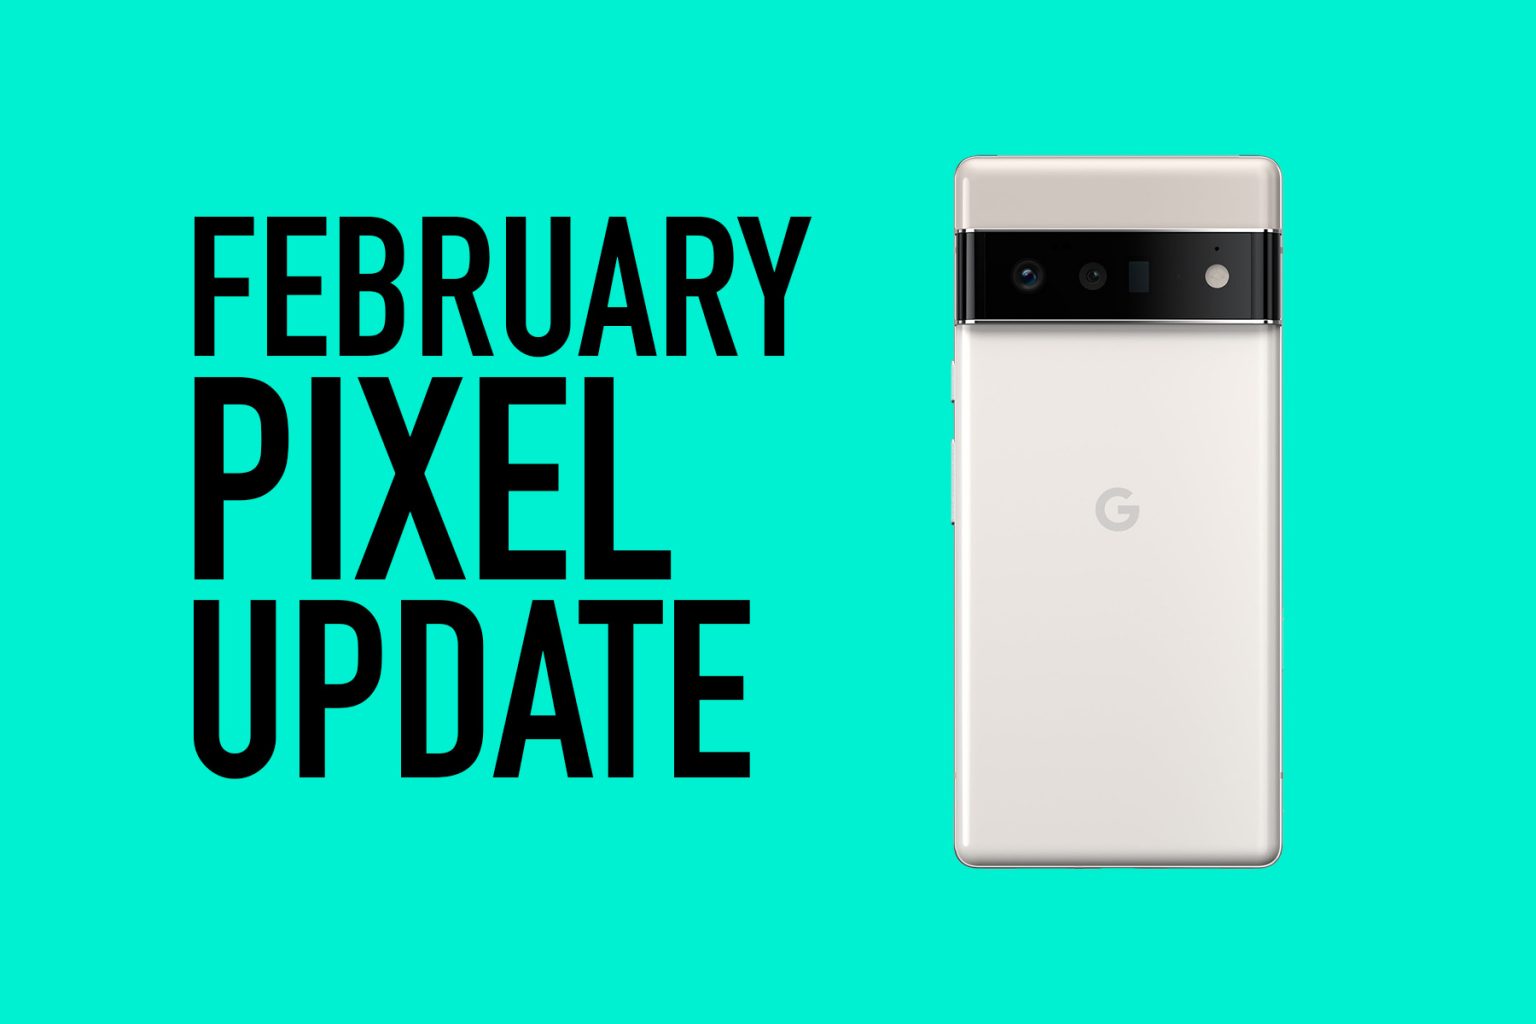 The Google Pixel 6 February Update is Here